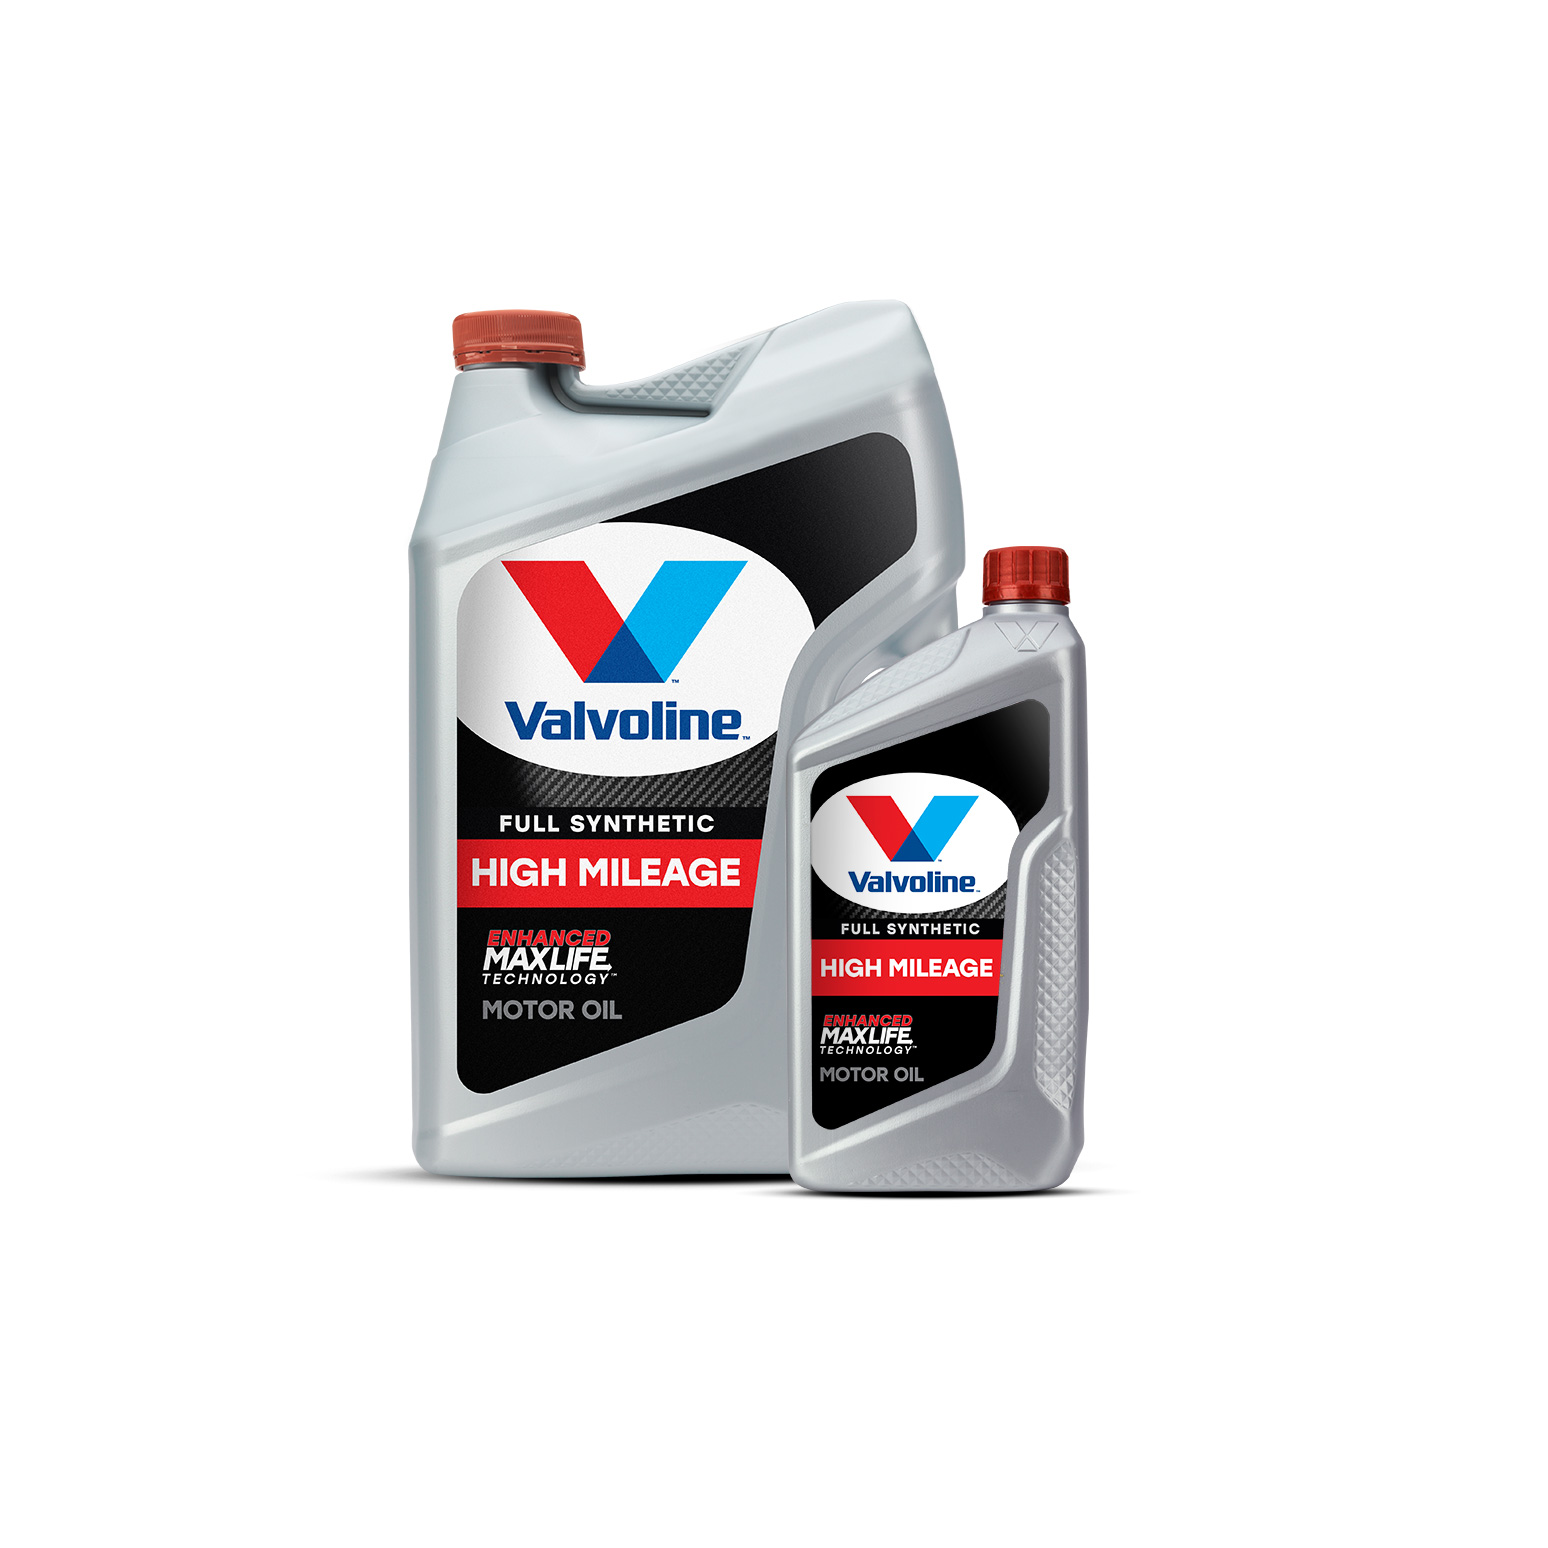 Full Synthetic High Mileage with MaxLife Technology - Valvoline